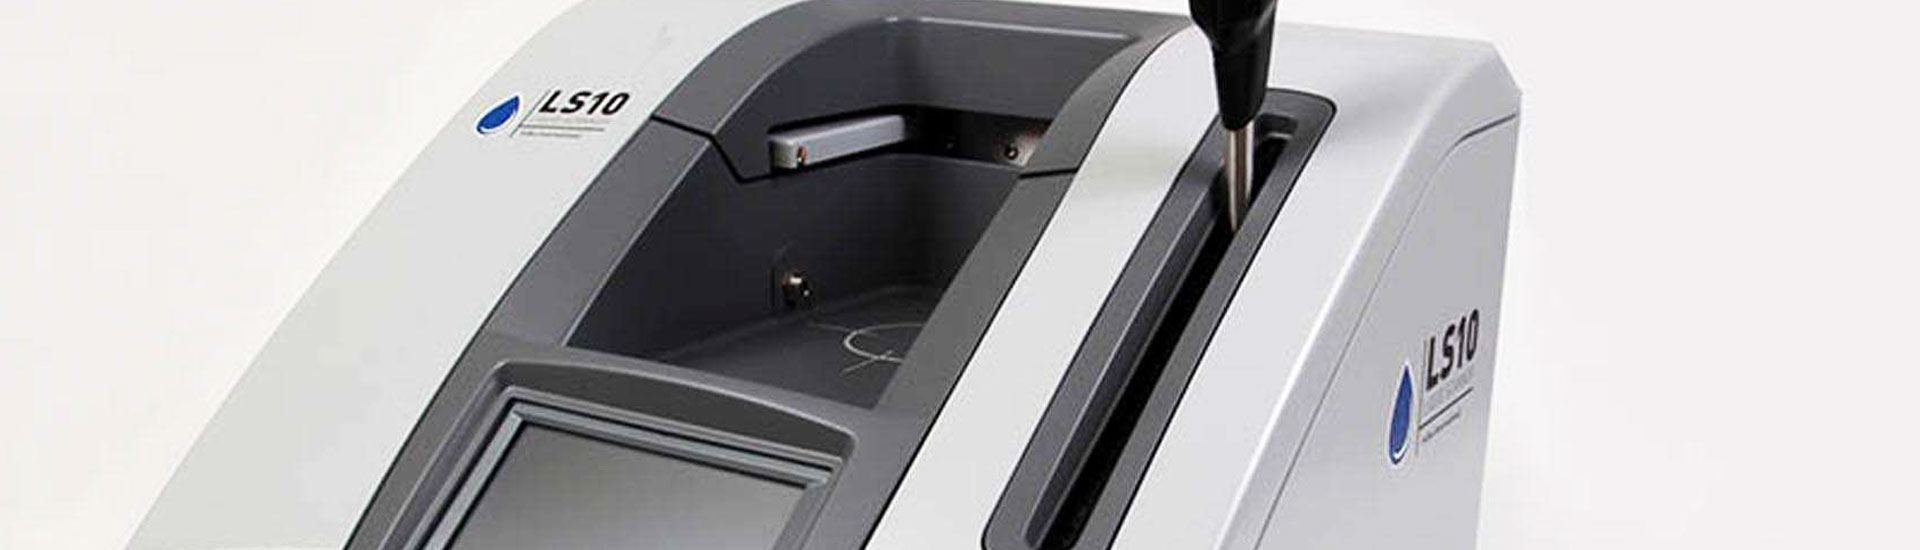 Photo: Image of an LS-10 Scanner